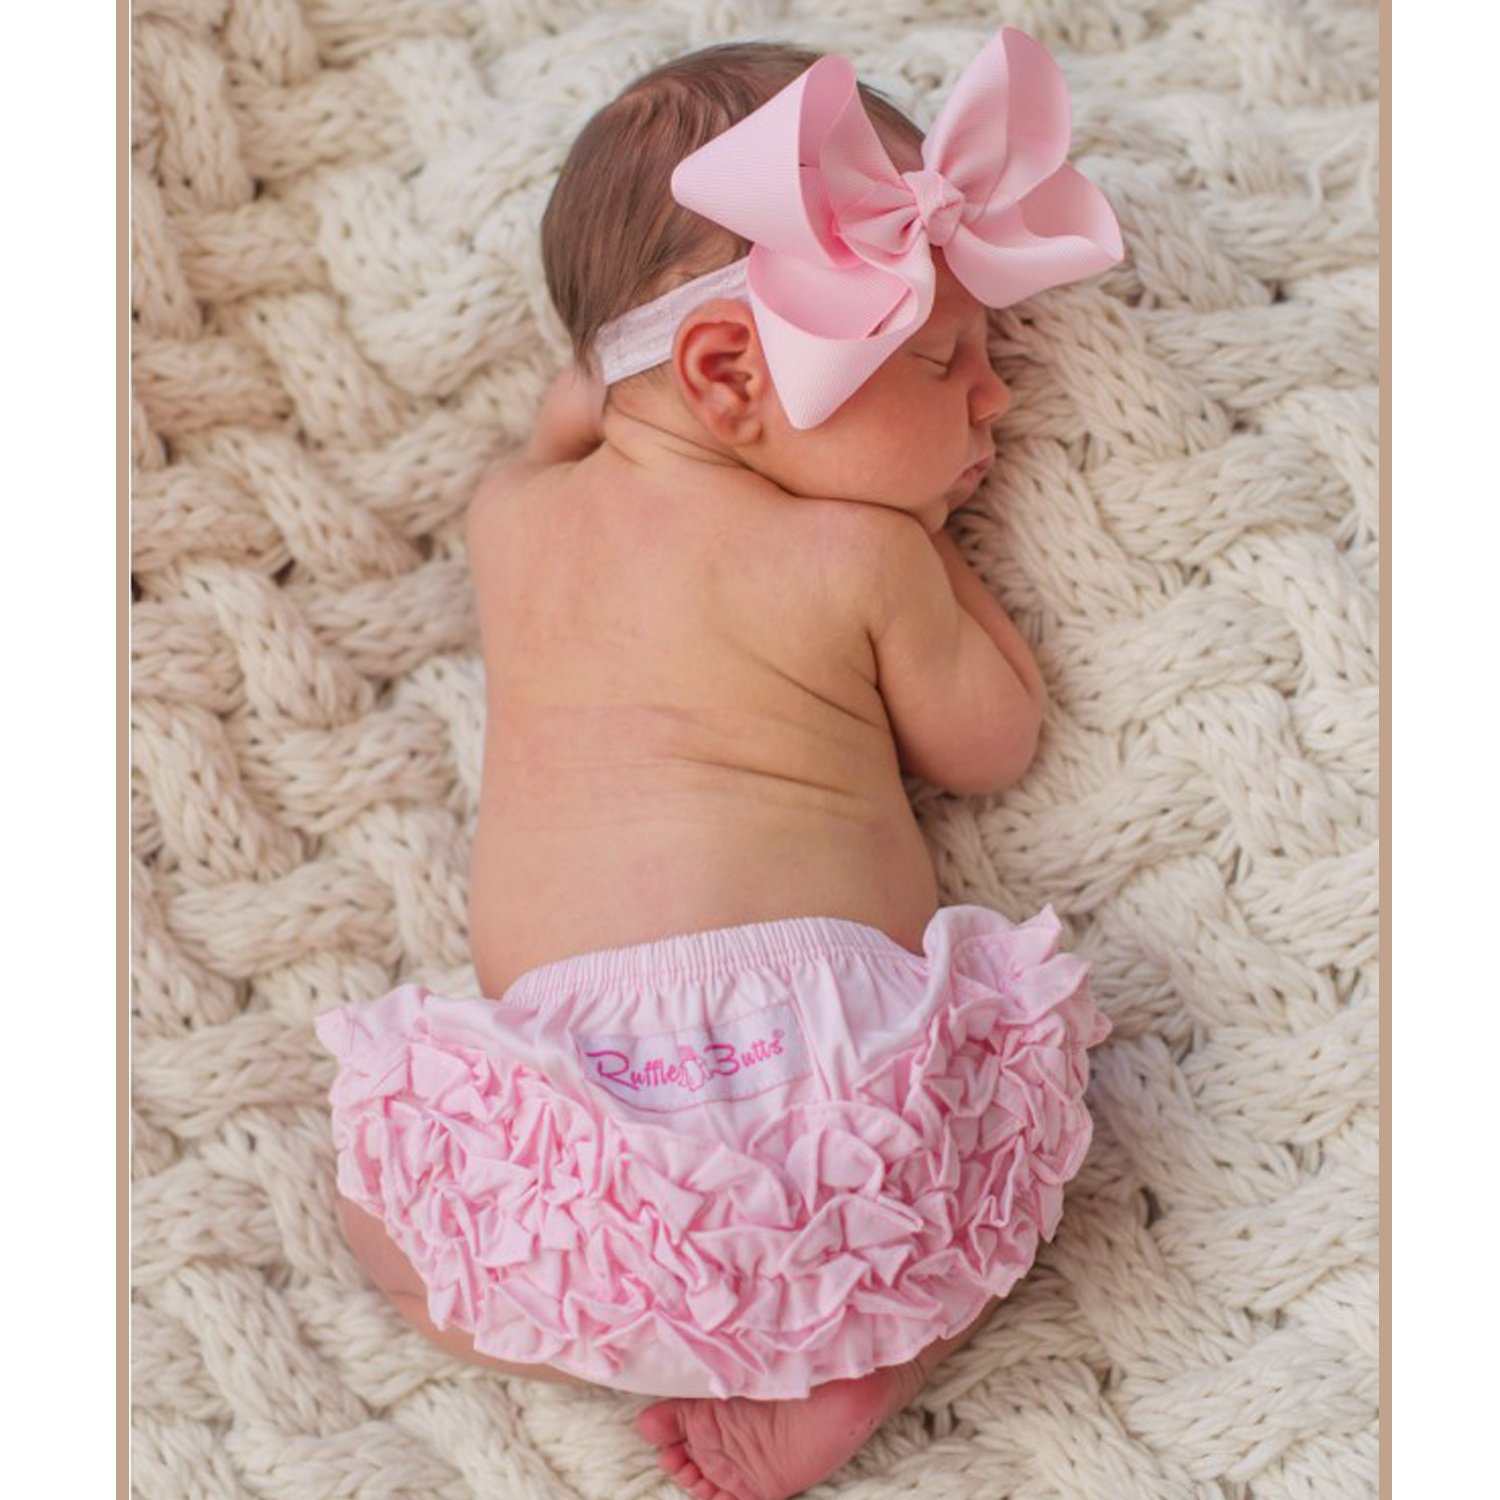 https://www.babyblingstreet.com/baby-toddler-boutique/pc/catalog/ruffle-butts-pink-bow-hdbnd_232_detail.jpg